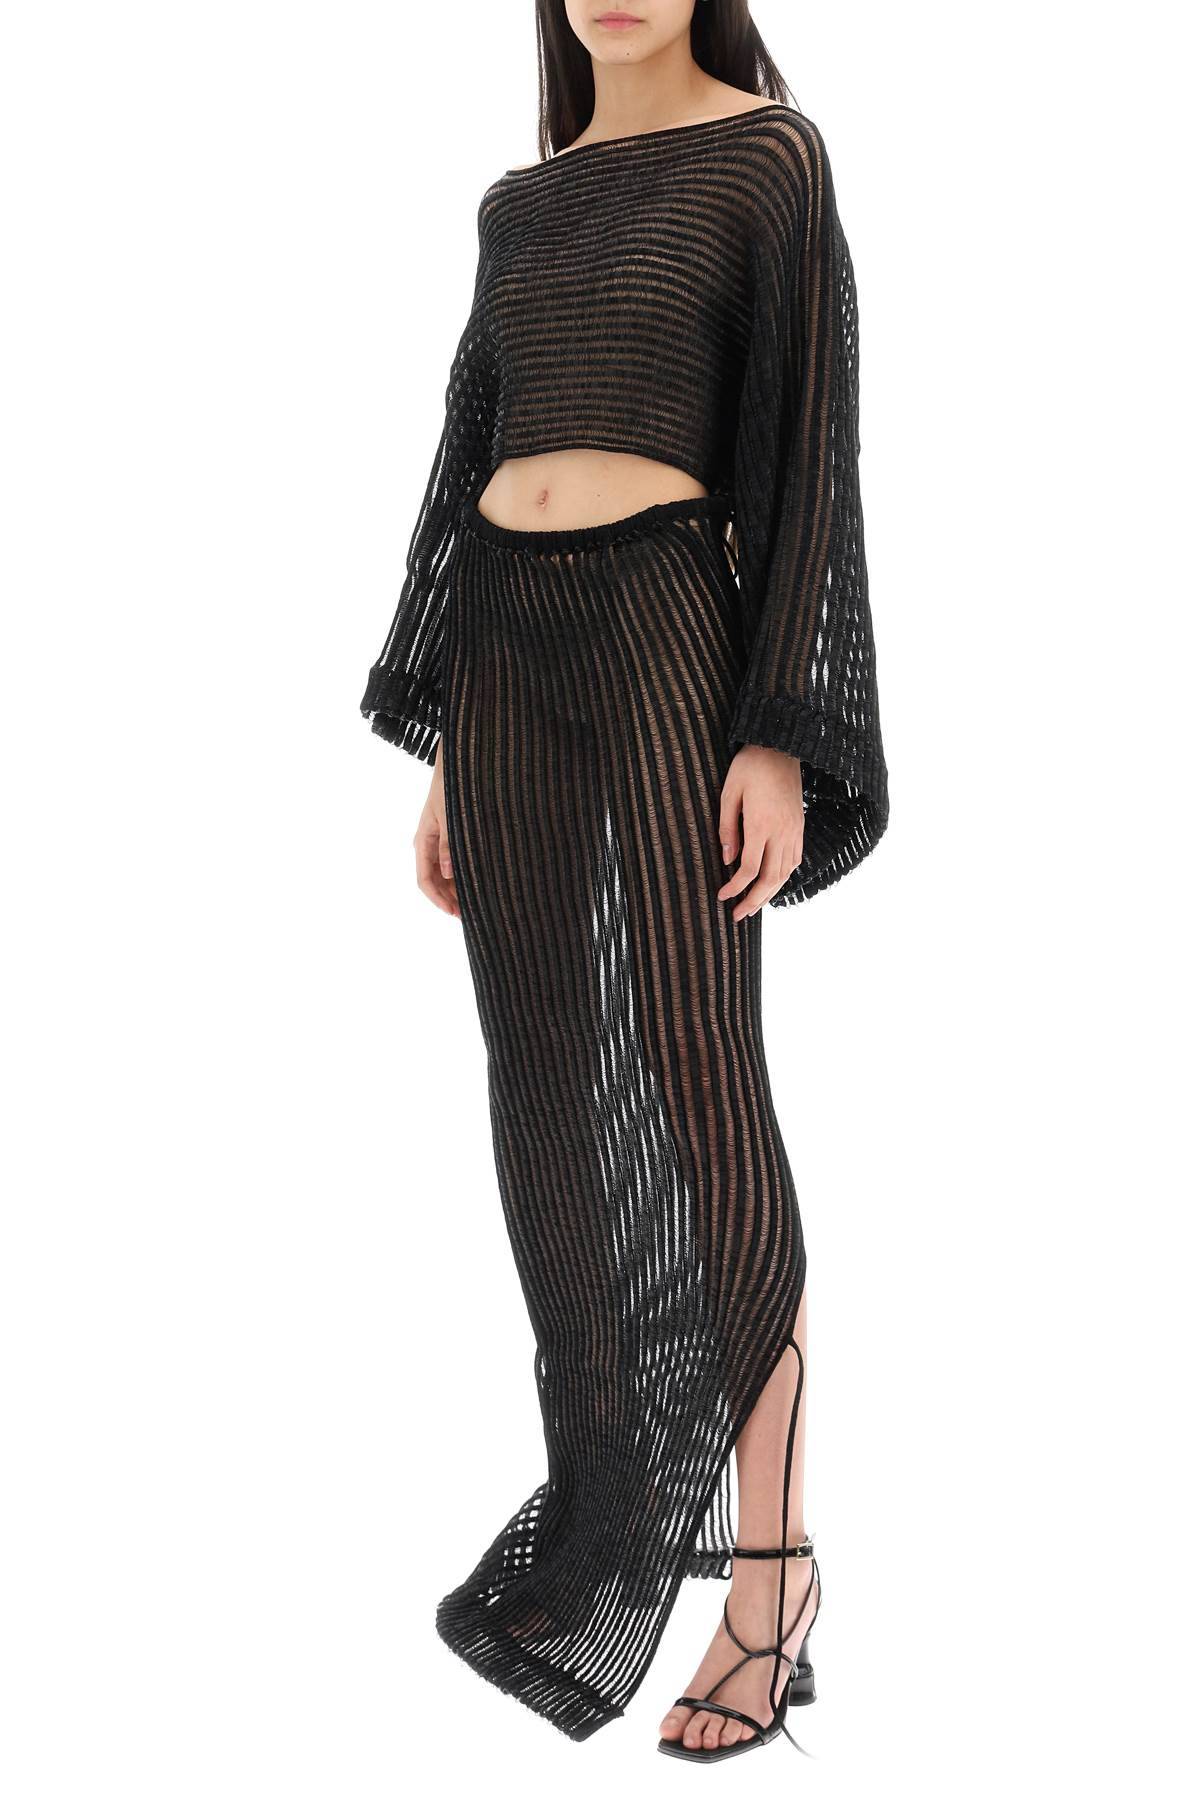 Shop A. Roege Hove Patricia Long Skirt In Black